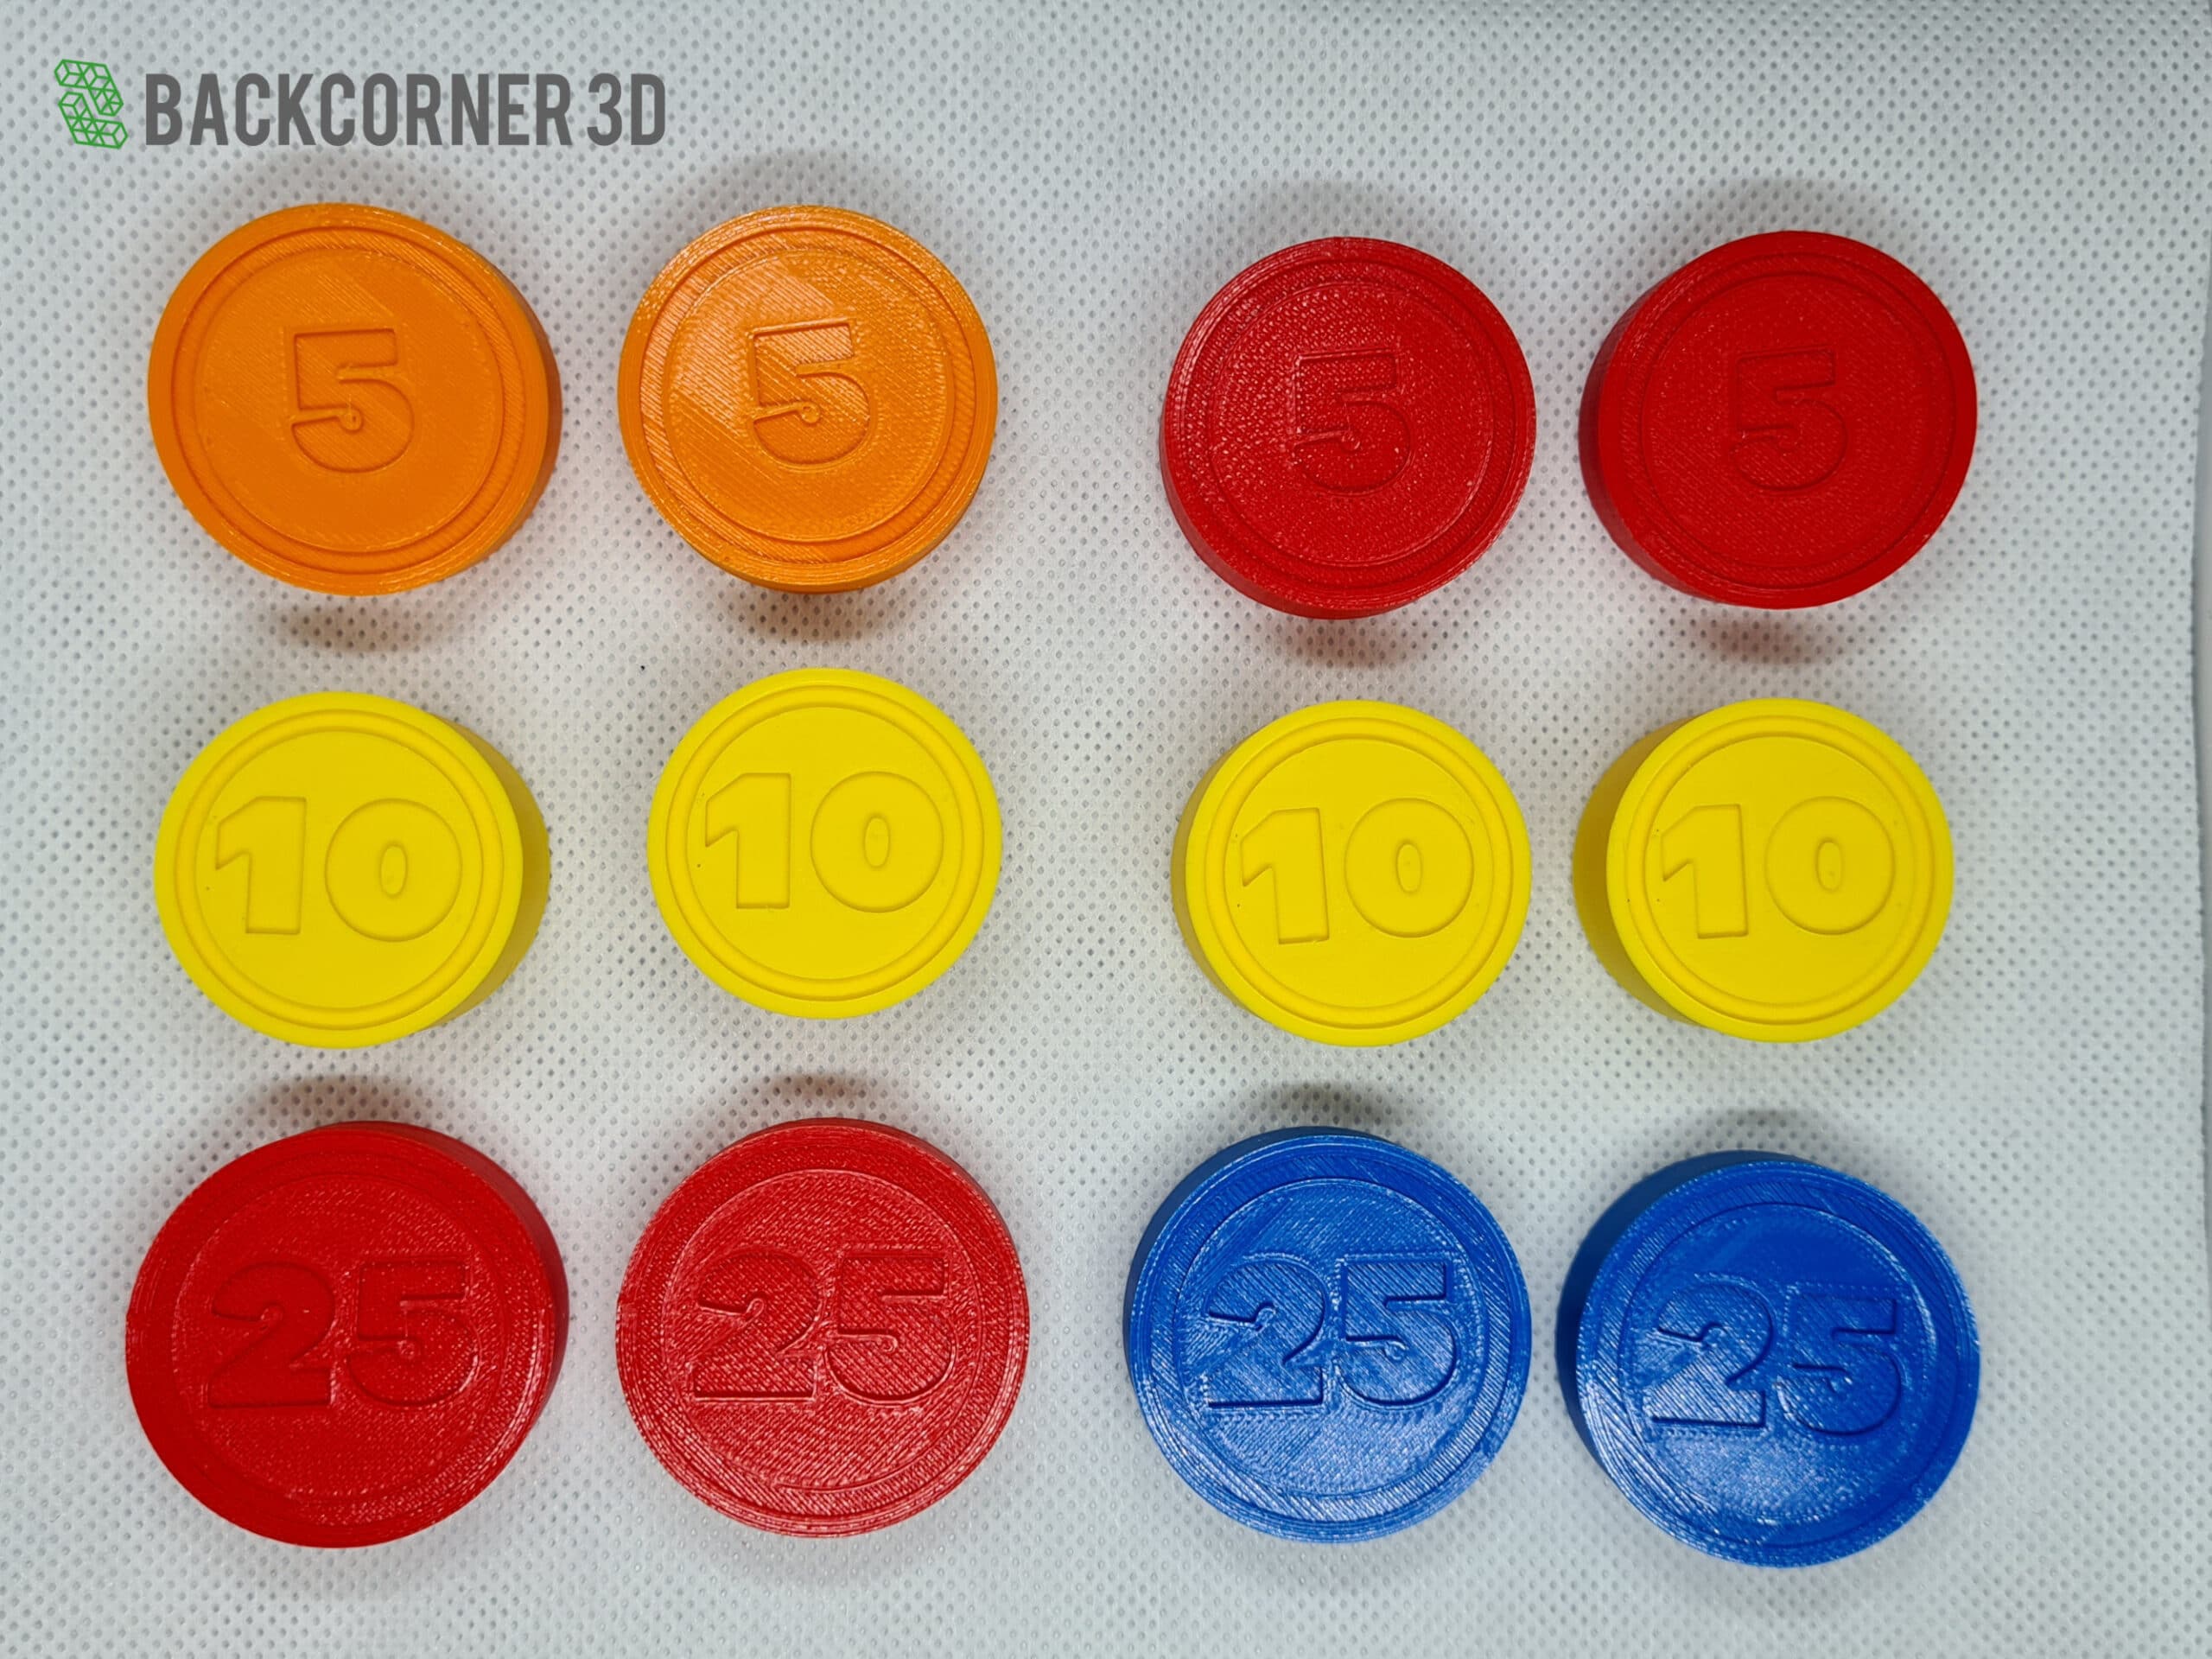 non-original coins set of 6 fits Fisher Price Cash Register Replacement coins 